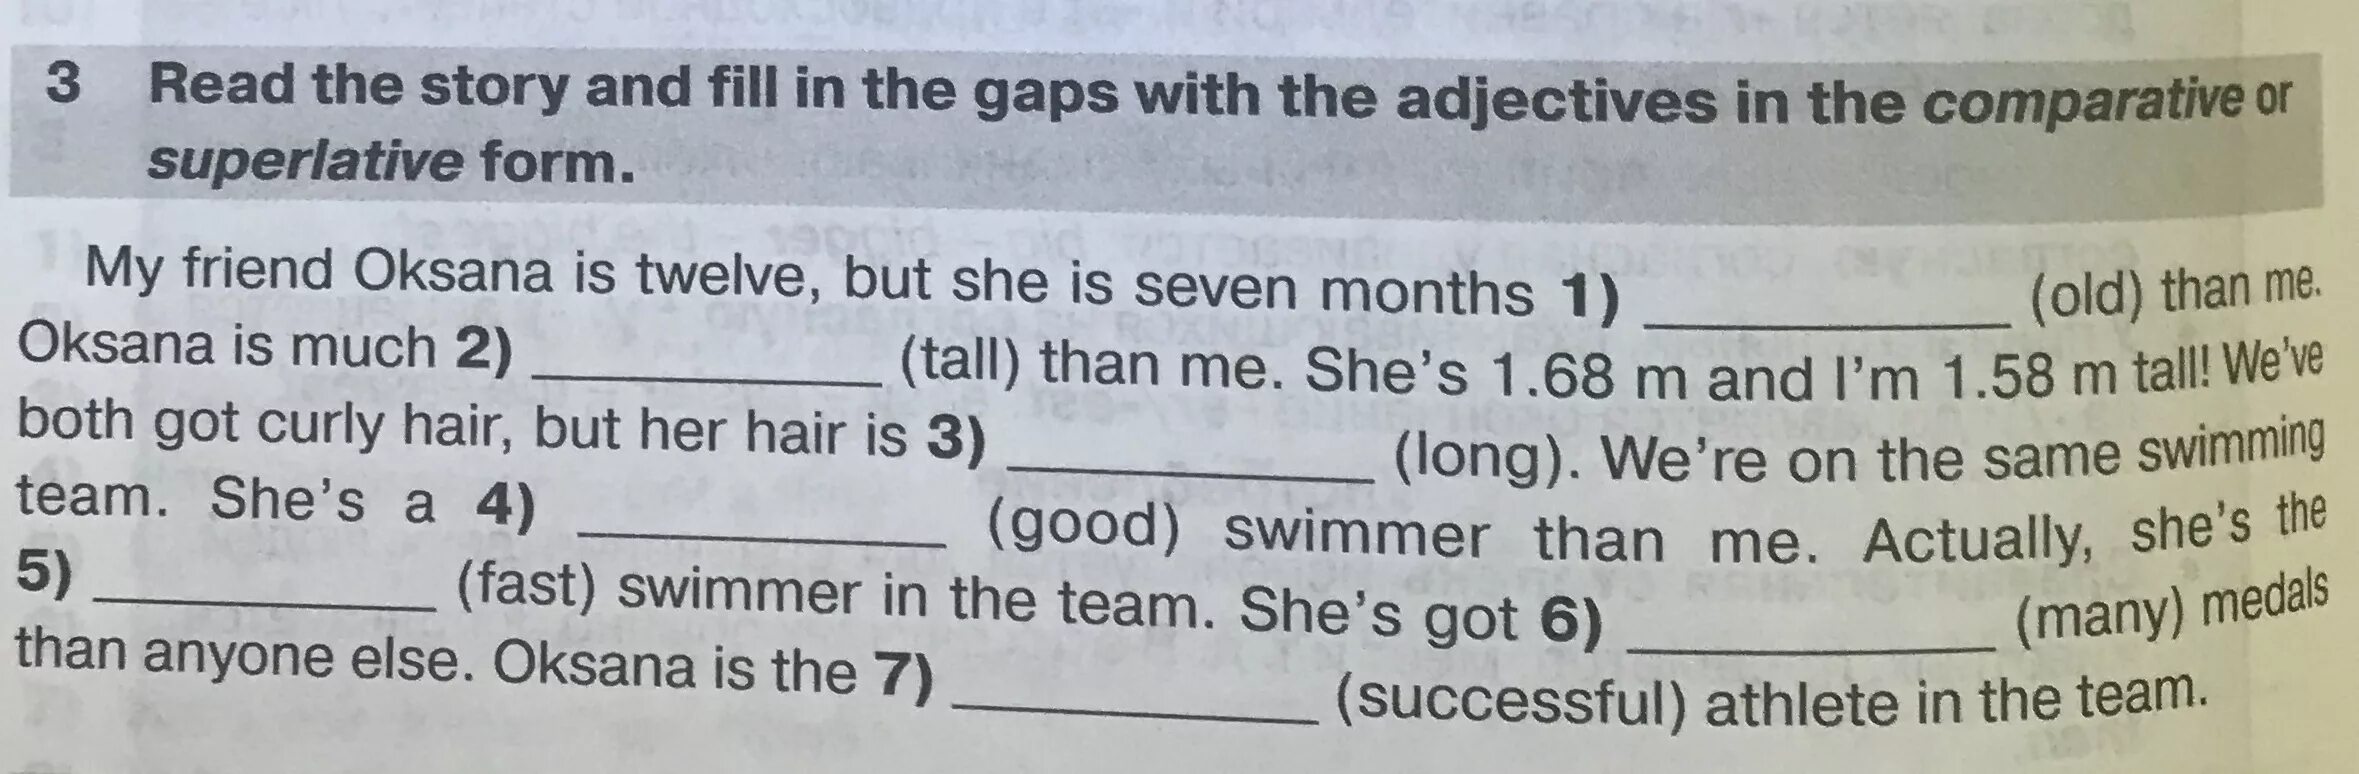 Complete the gaps with right comparative. Read the story and fill in the gaps with the adjectives in the Comparative or Superlative form. Read the story and fill in the gaps with the adjectives in the Comparative or Superlative form my friend Oksana. Fill in the gaps with the Comparative or the Superlative form. Comparative adjectives fill in the gaps.